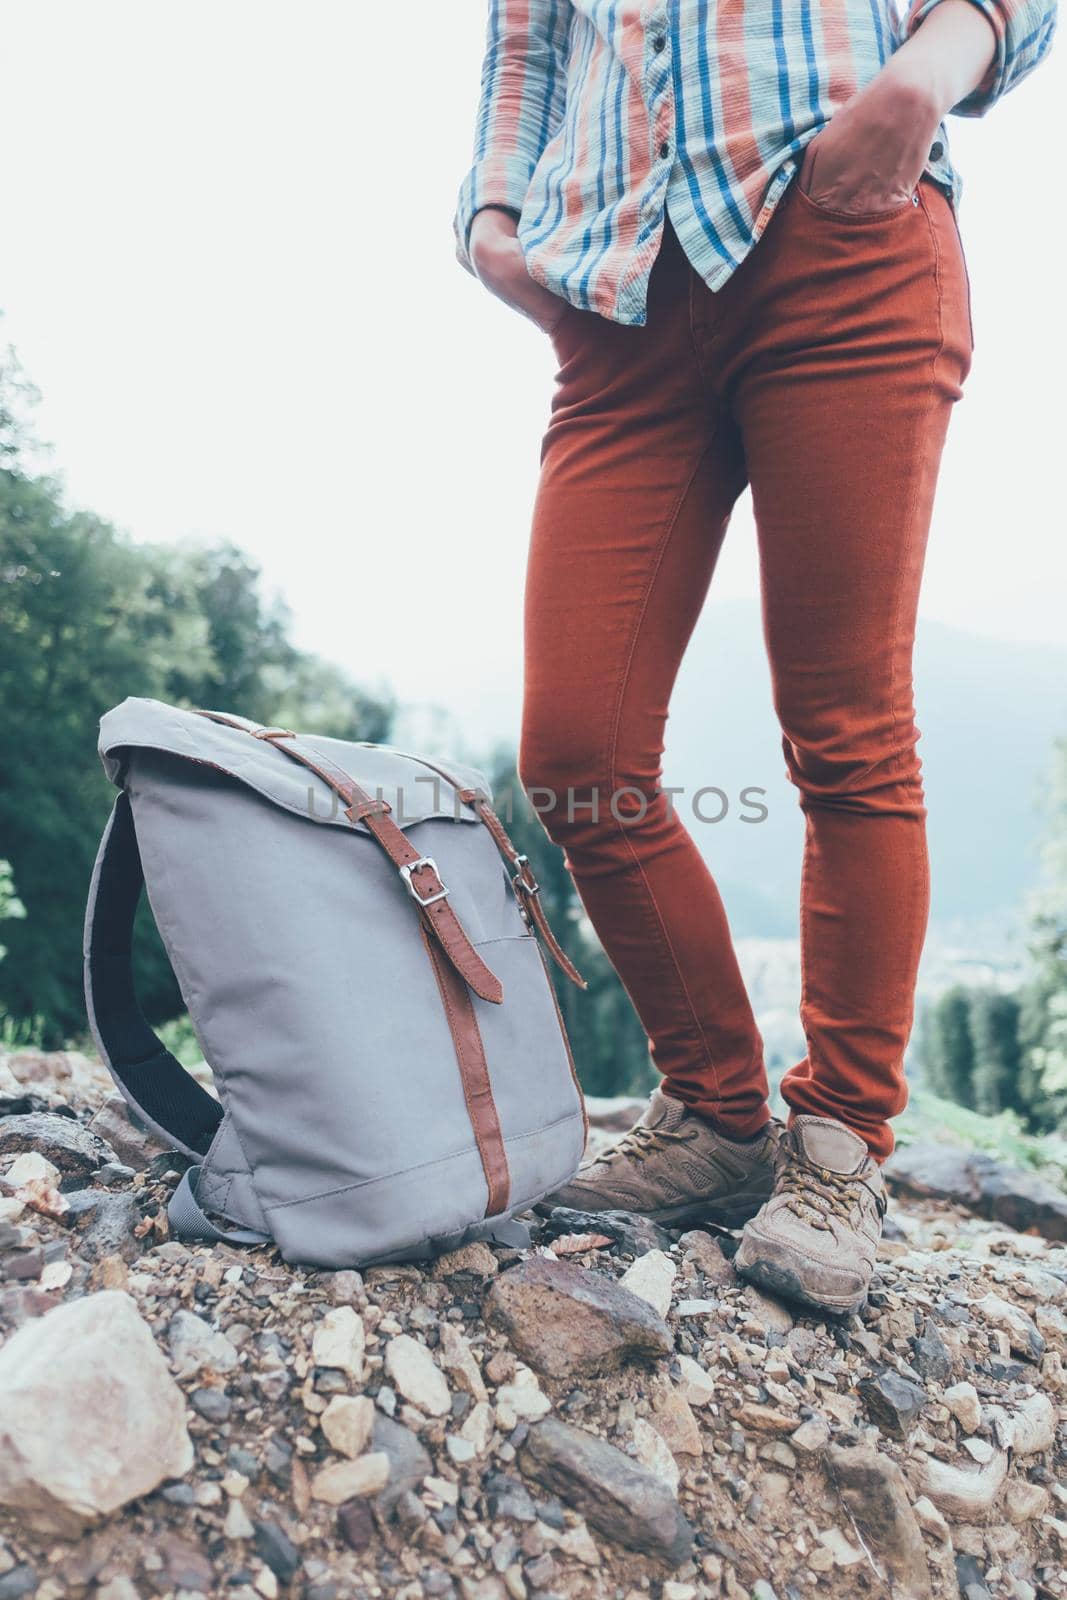 Unrecognizable female traveler standing with backpack outdoor, view of legs.